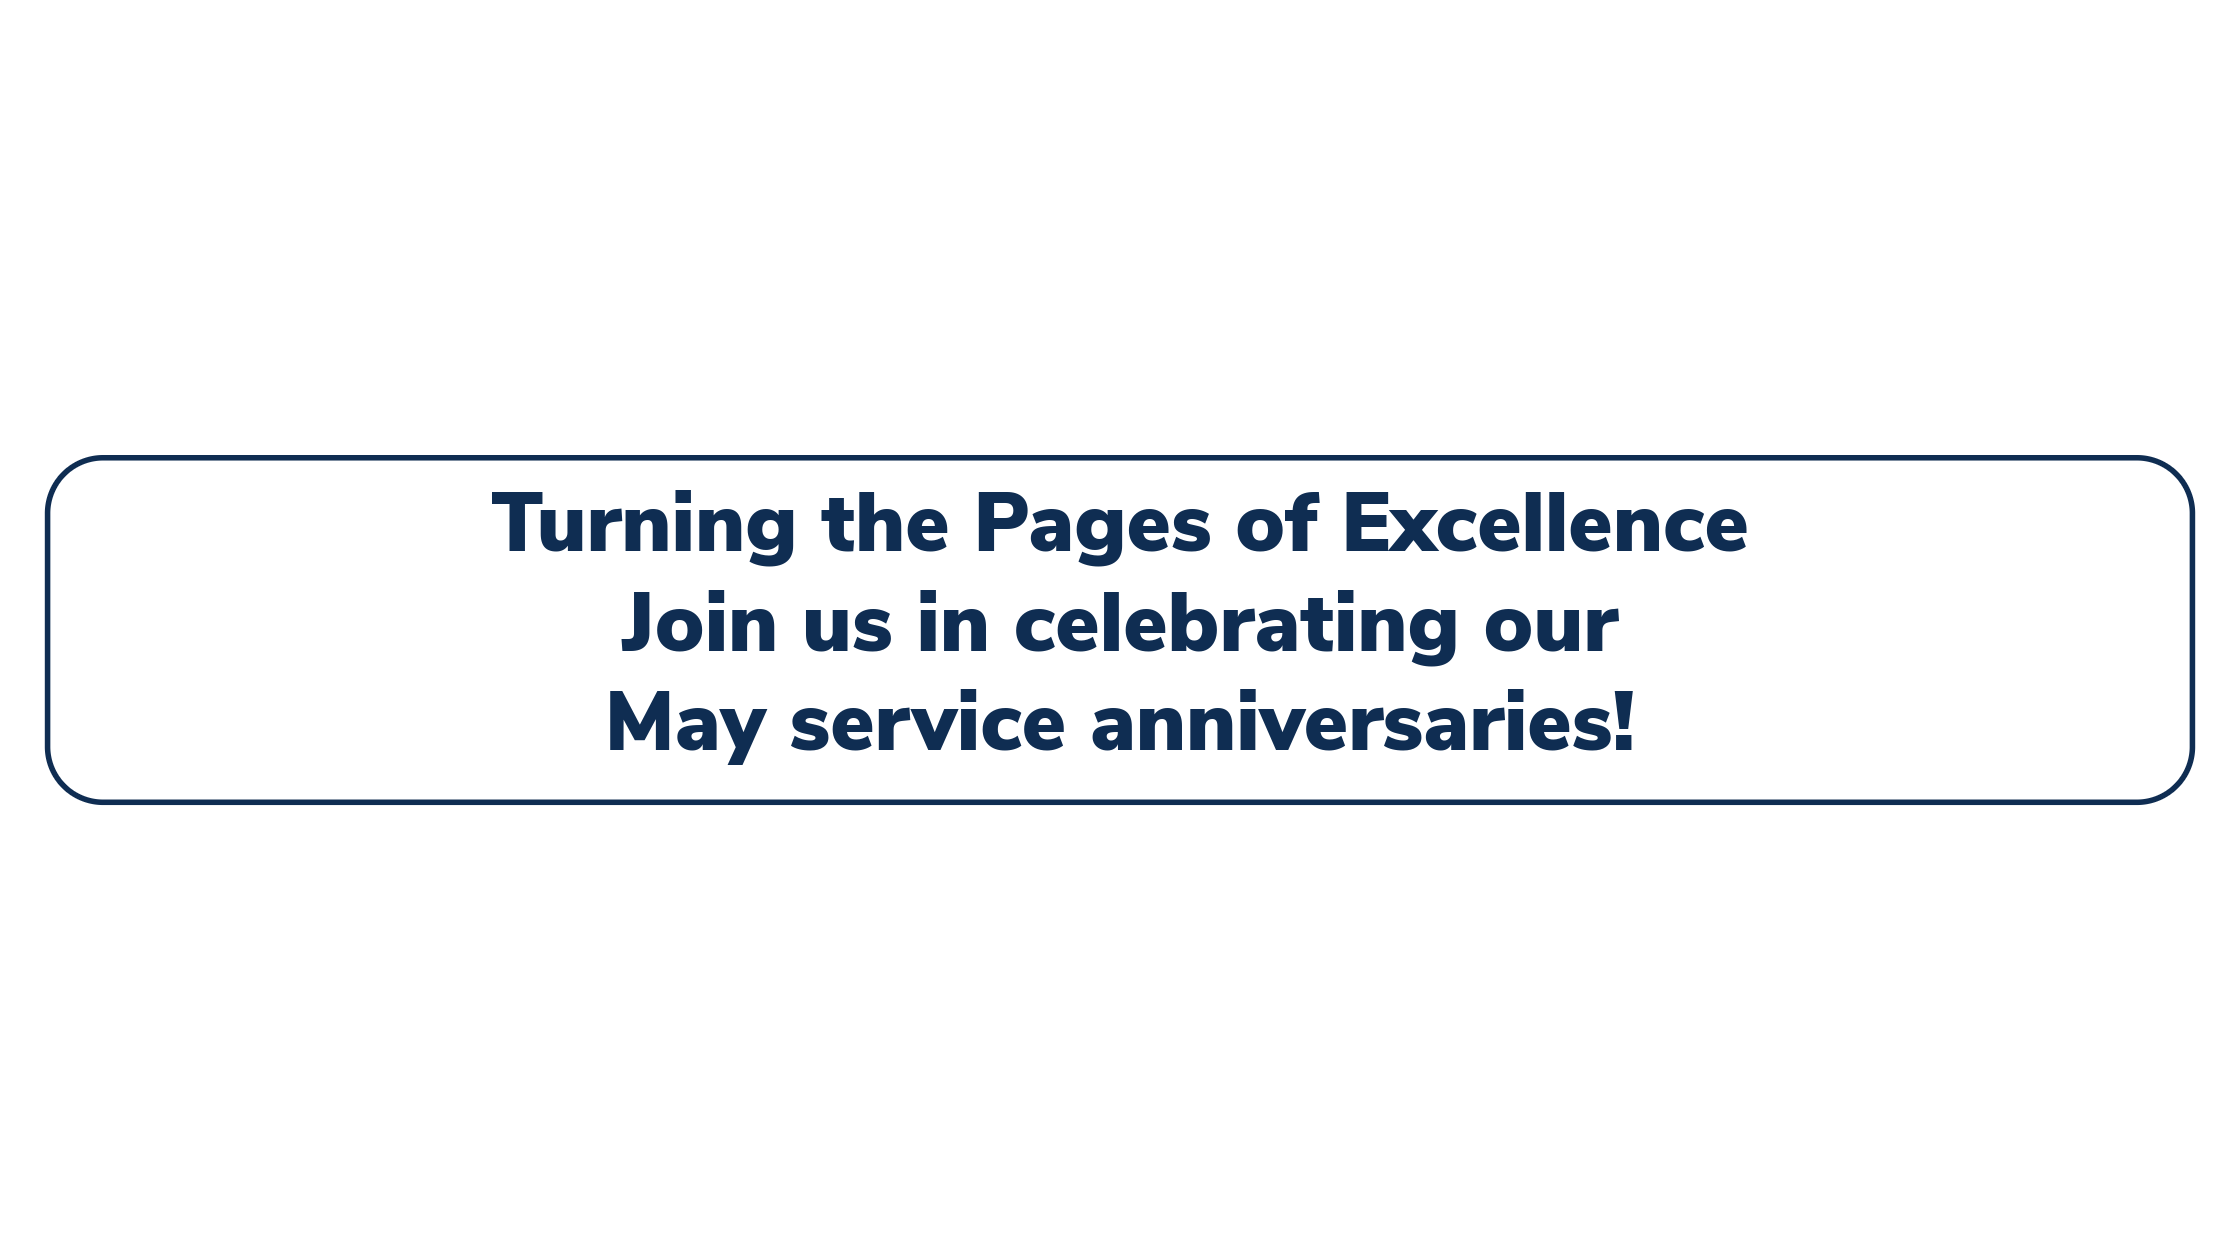 Turning the Pages of Excellence: May Service Anniversaries